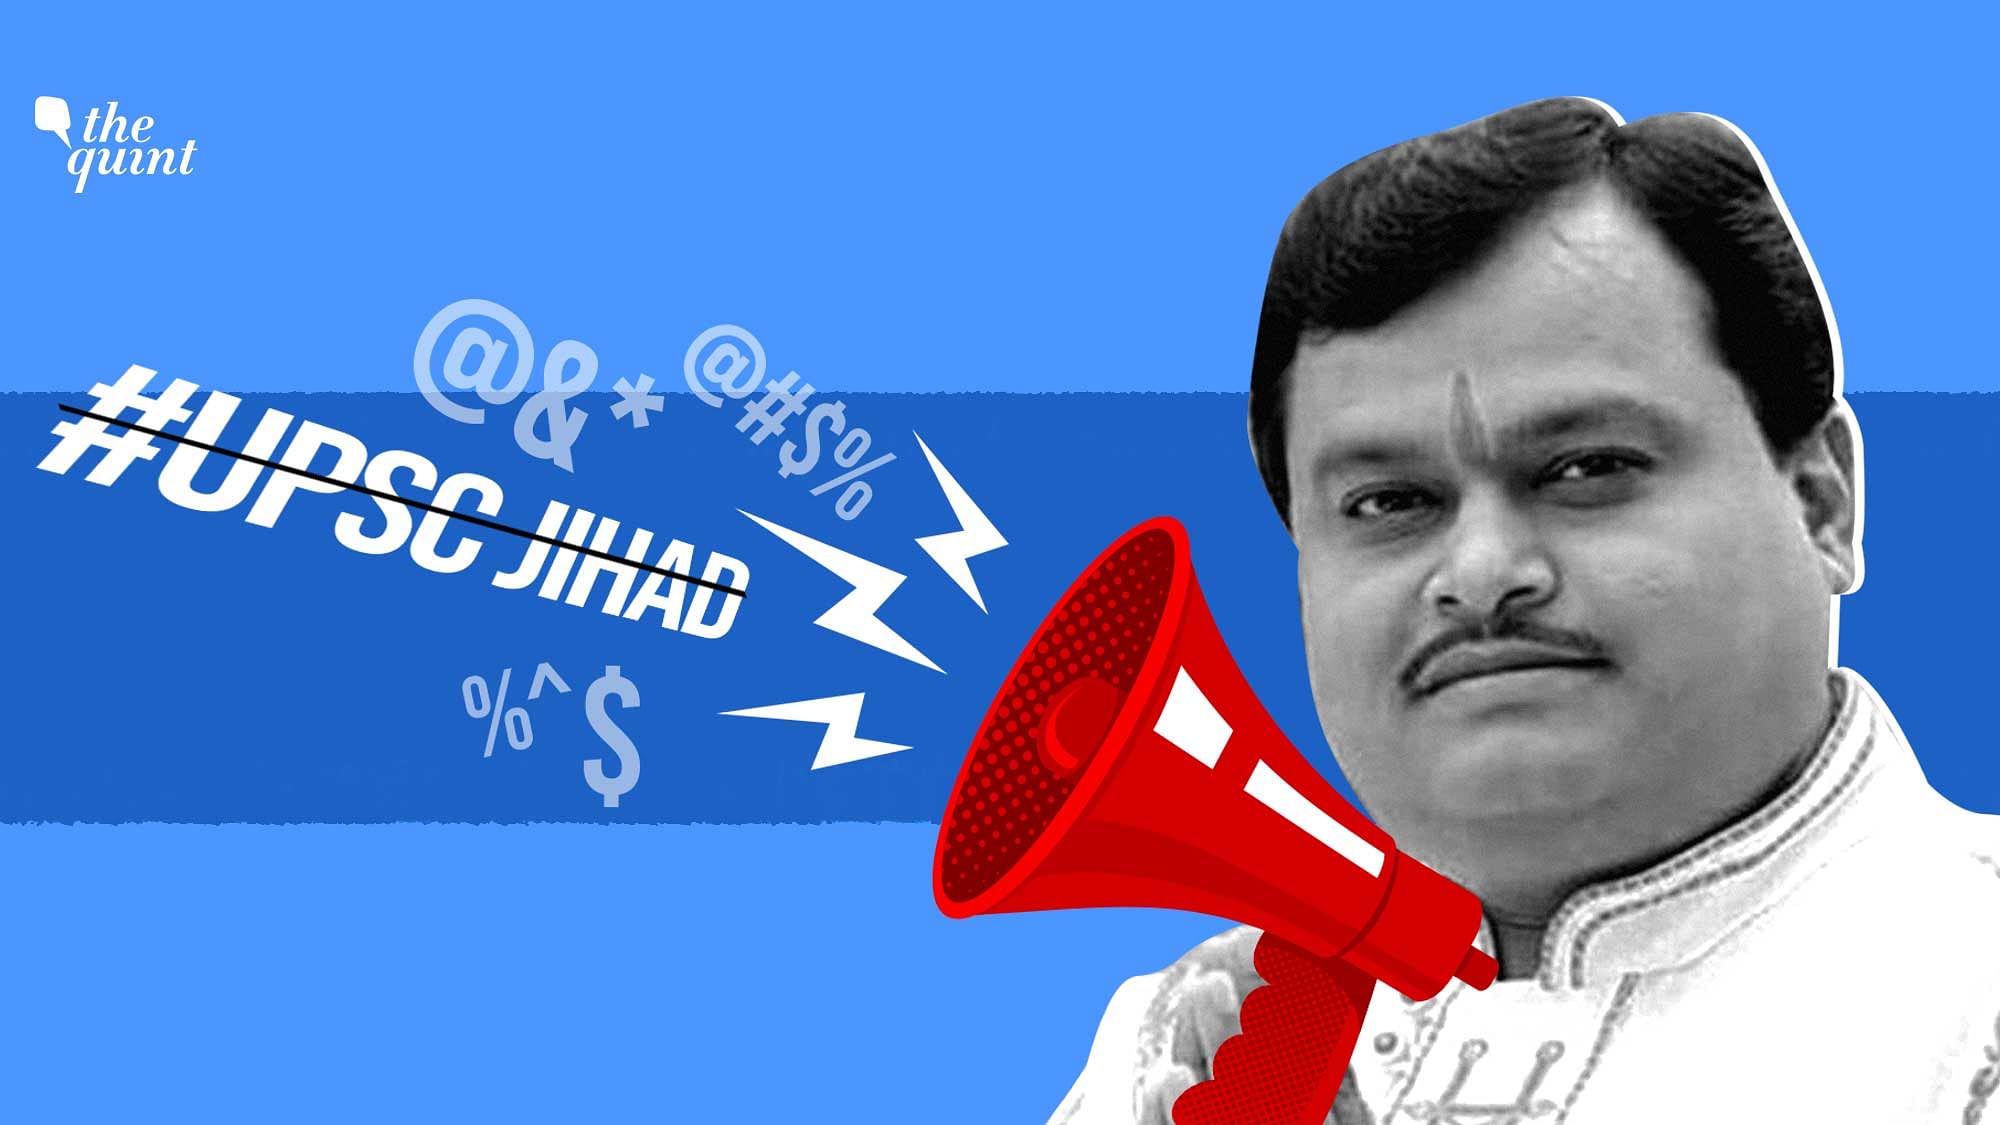 Chavhanke, said that he will do 10 more episodes to elaborate on each claim that he made on Friday night’s show.